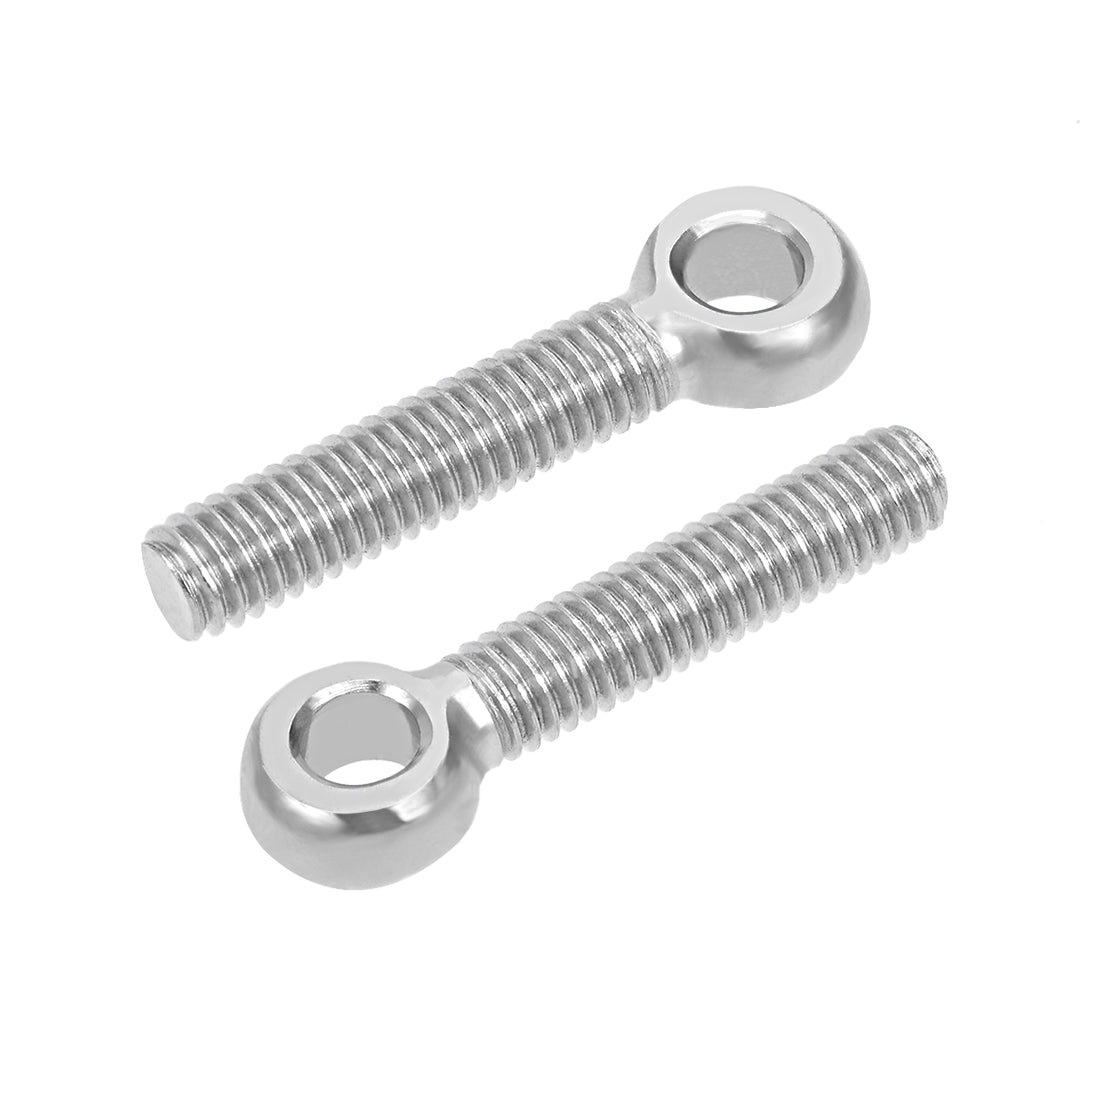 uxcell Uxcell M6 x 30mm 304 Stainless Steel Machine Shoulder Lift Eye Bolt Rigging 12pcs Silver Tone